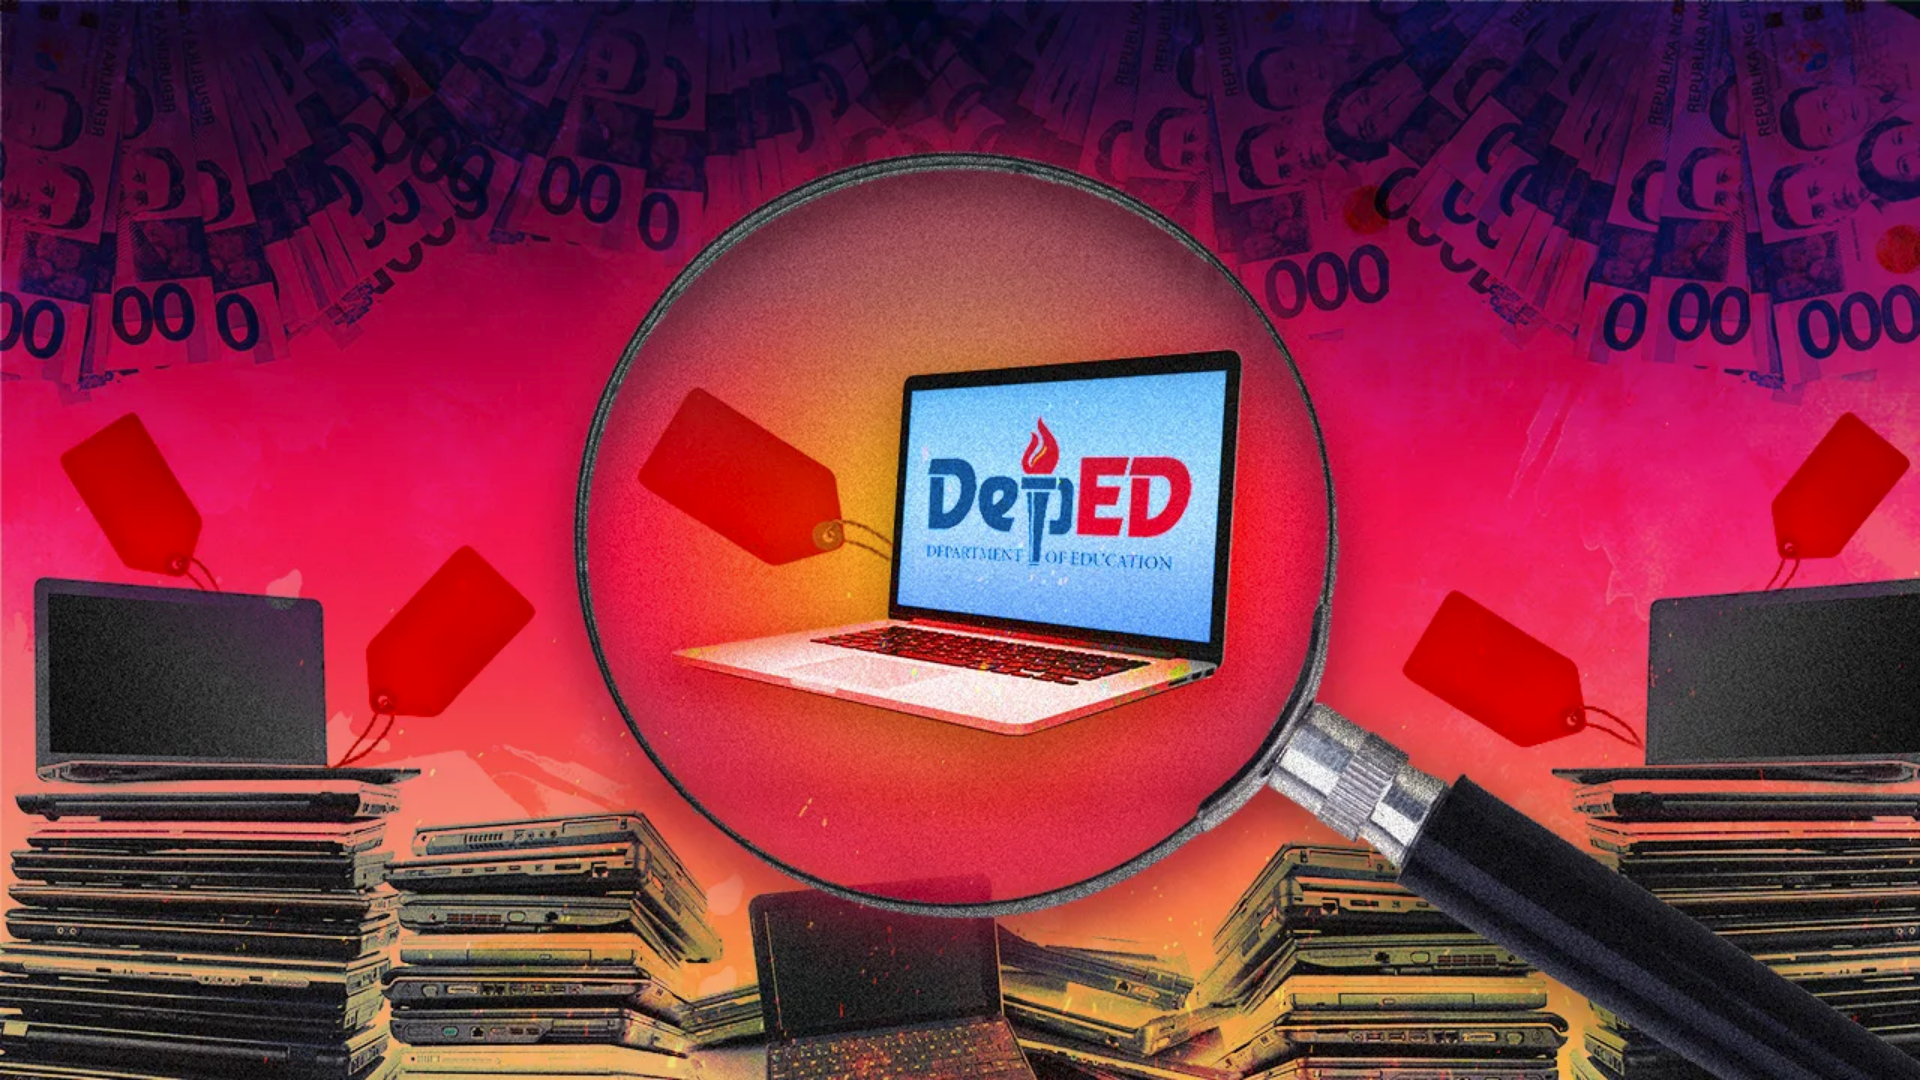 Resignation of Deped officials engaged in the botched laptop transaction